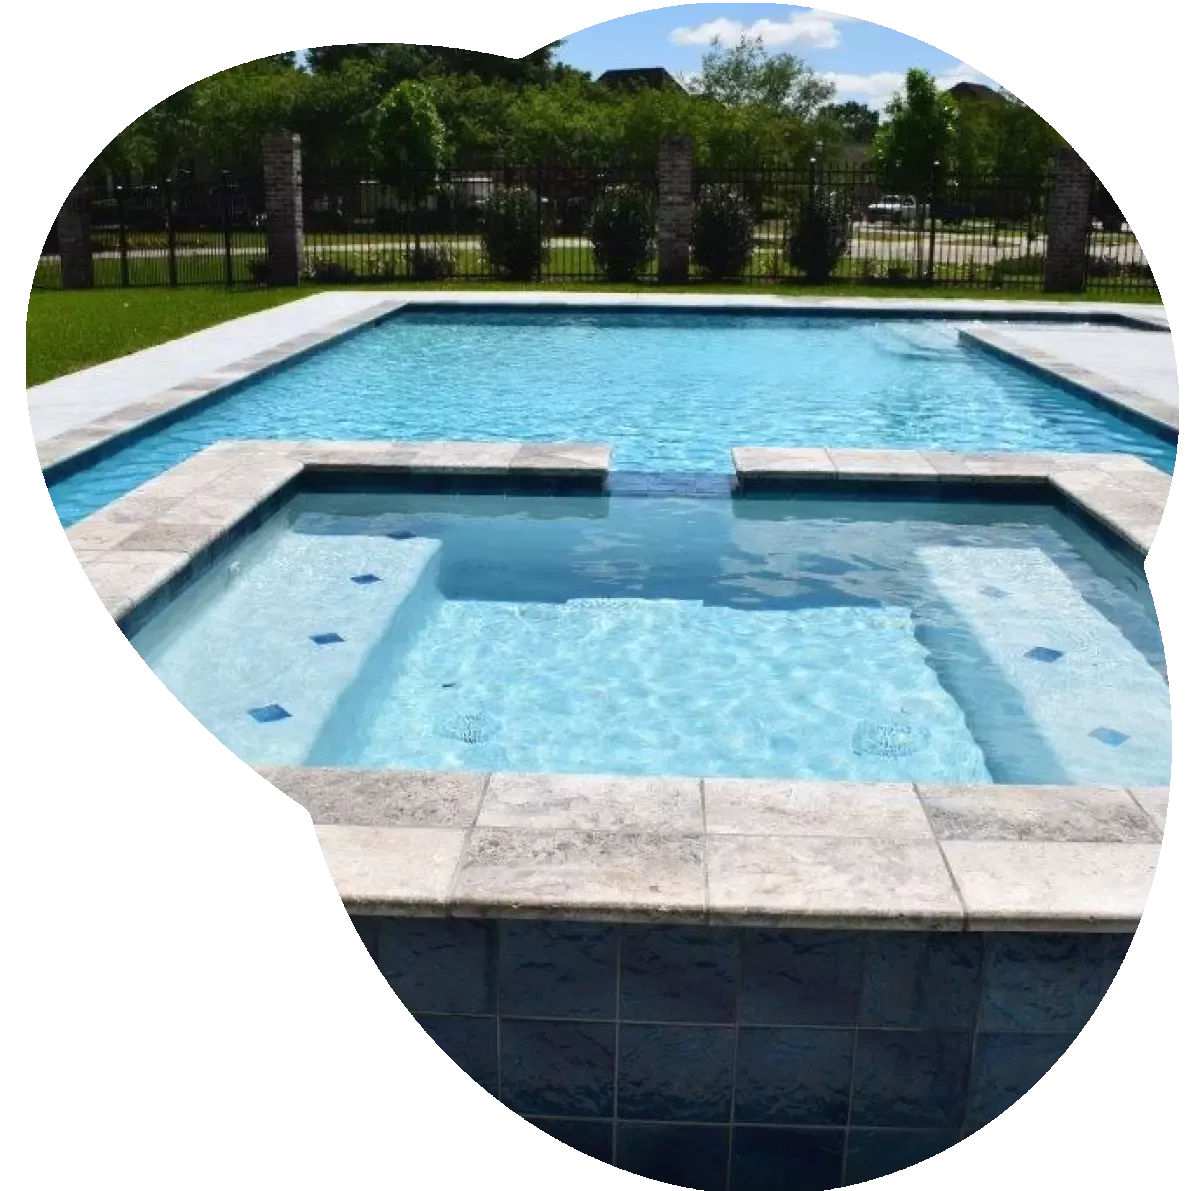 A gunite pool with a hot tub attached.